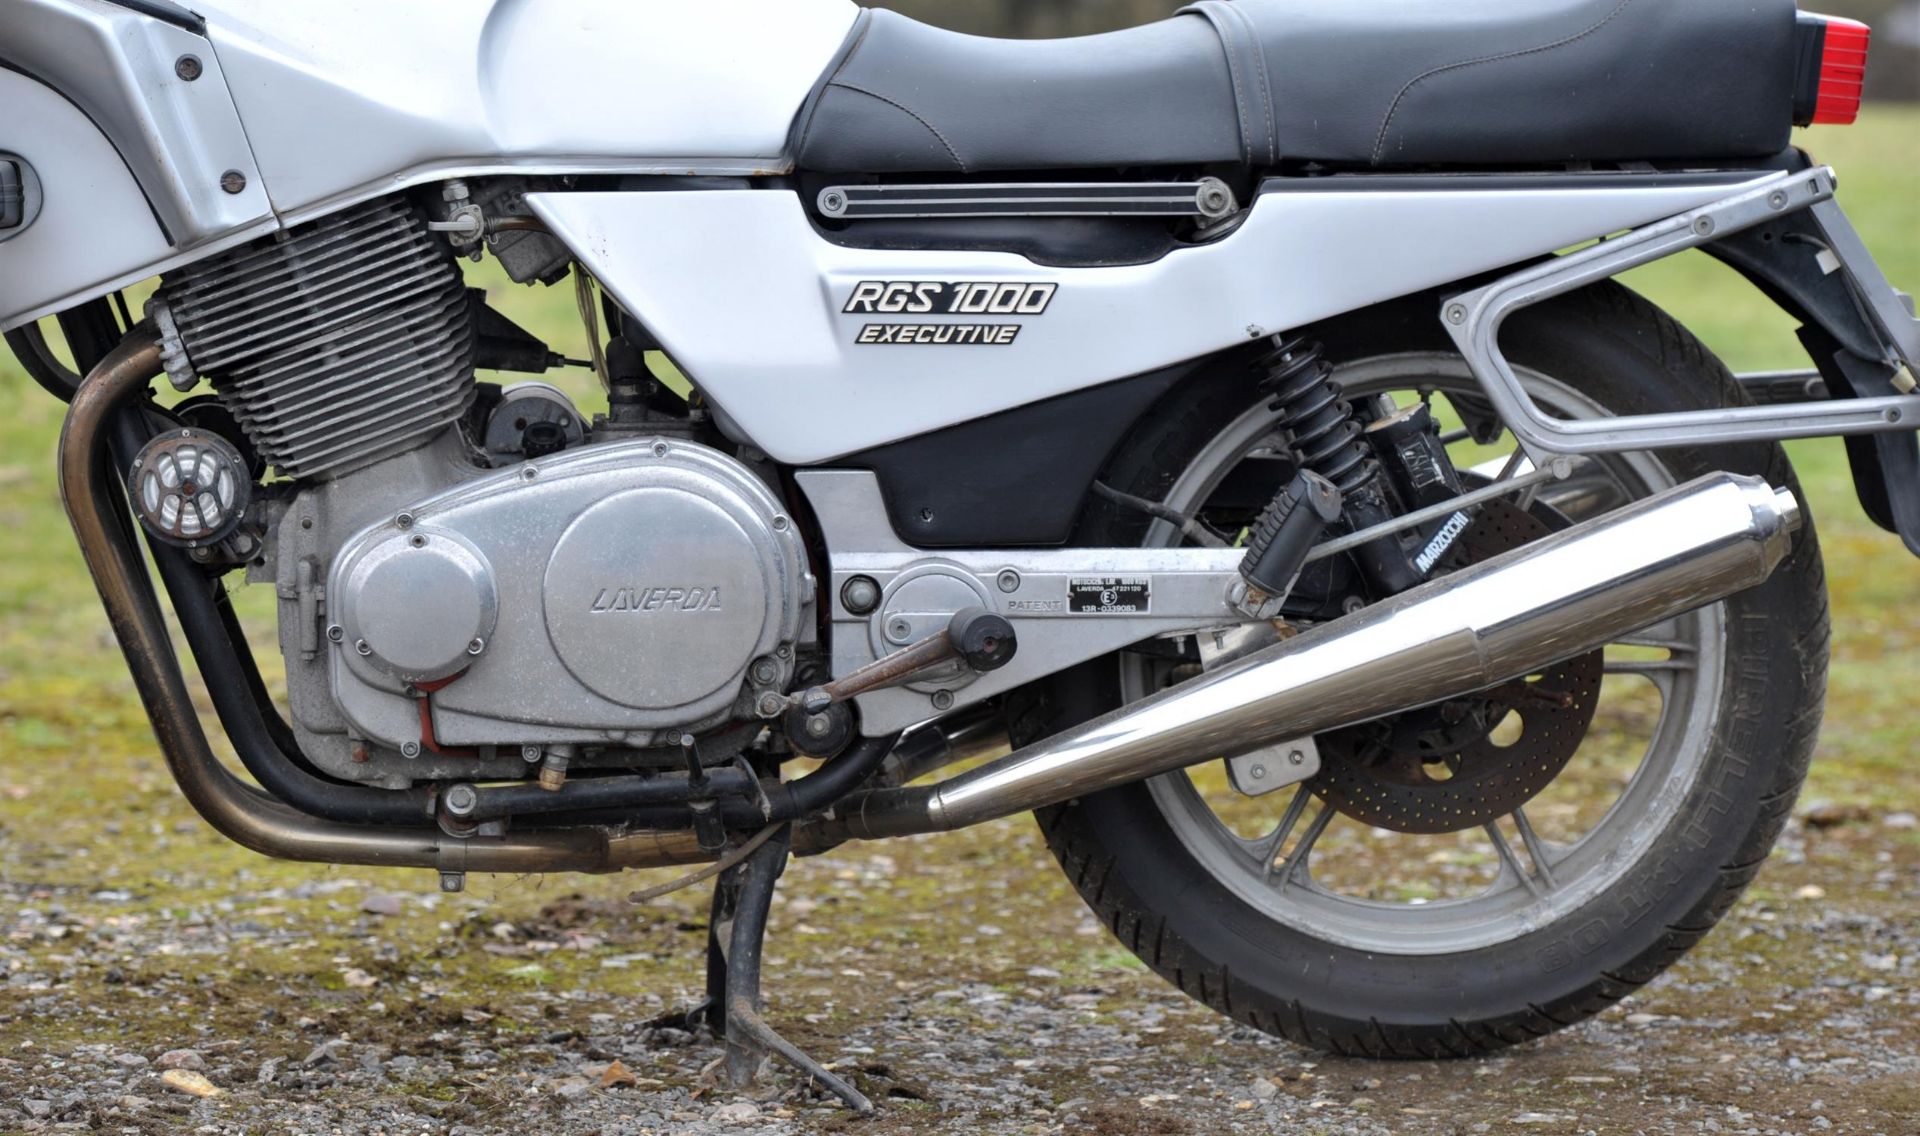 Motor Bike, Laverda RGS 1000 Executive, silver chassis, registration number D718 HPR, 1.8cc. - Image 2 of 12